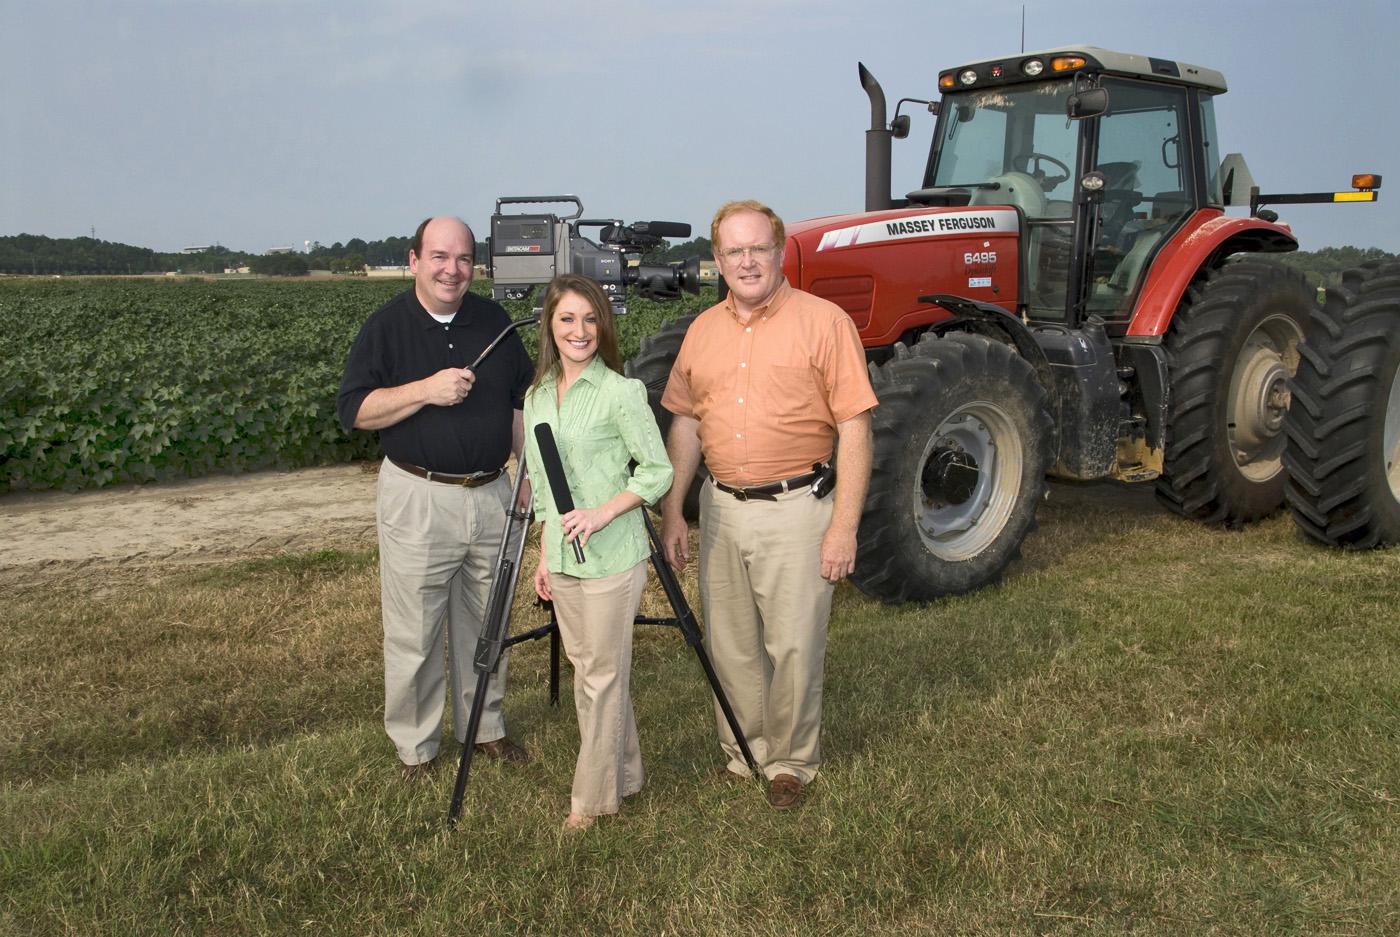 The current Farmweek team includes Leighton Spann, left, Amy Taylor and Artis Ford. (Photo by Marco Nicovich)